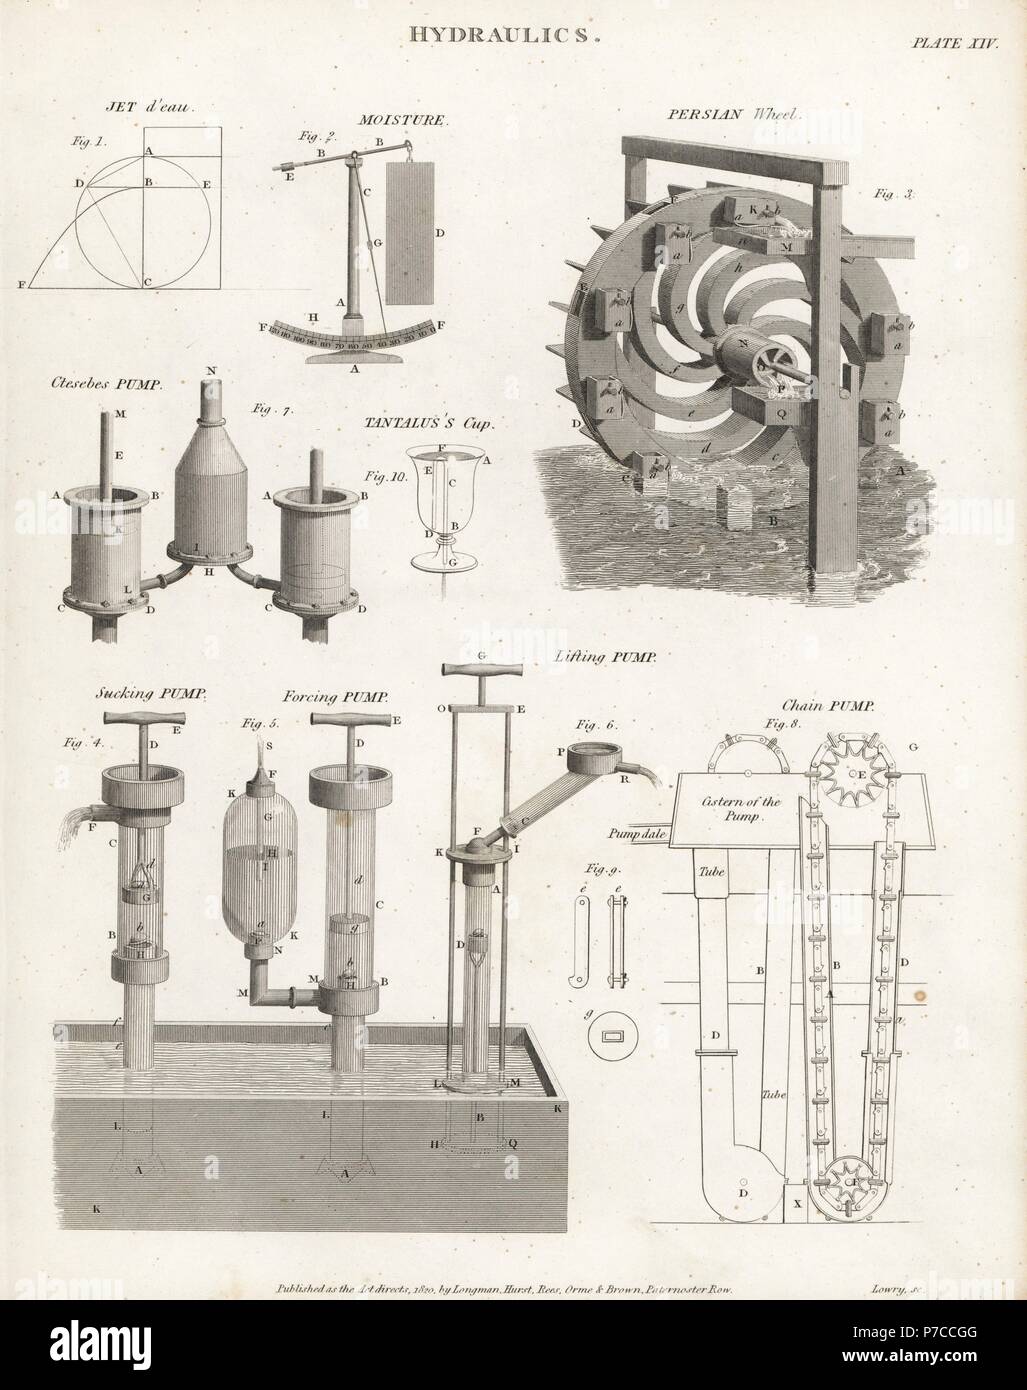 Types of hydraulics systems and pumps: Persian wheel or sakia, Tantalus' or Pythagorean cup, Ctesibius's ancient pump, and sucking, forcing, lifting and chain pumps. Copperplate engraving by Wilson Lowry from Abraham Rees' Cyclopedia or Universal Dictionary of Arts, Sciences and Literature, Longman, Hurst, Rees, Orme and Brown, London, 1820. Stock Photo